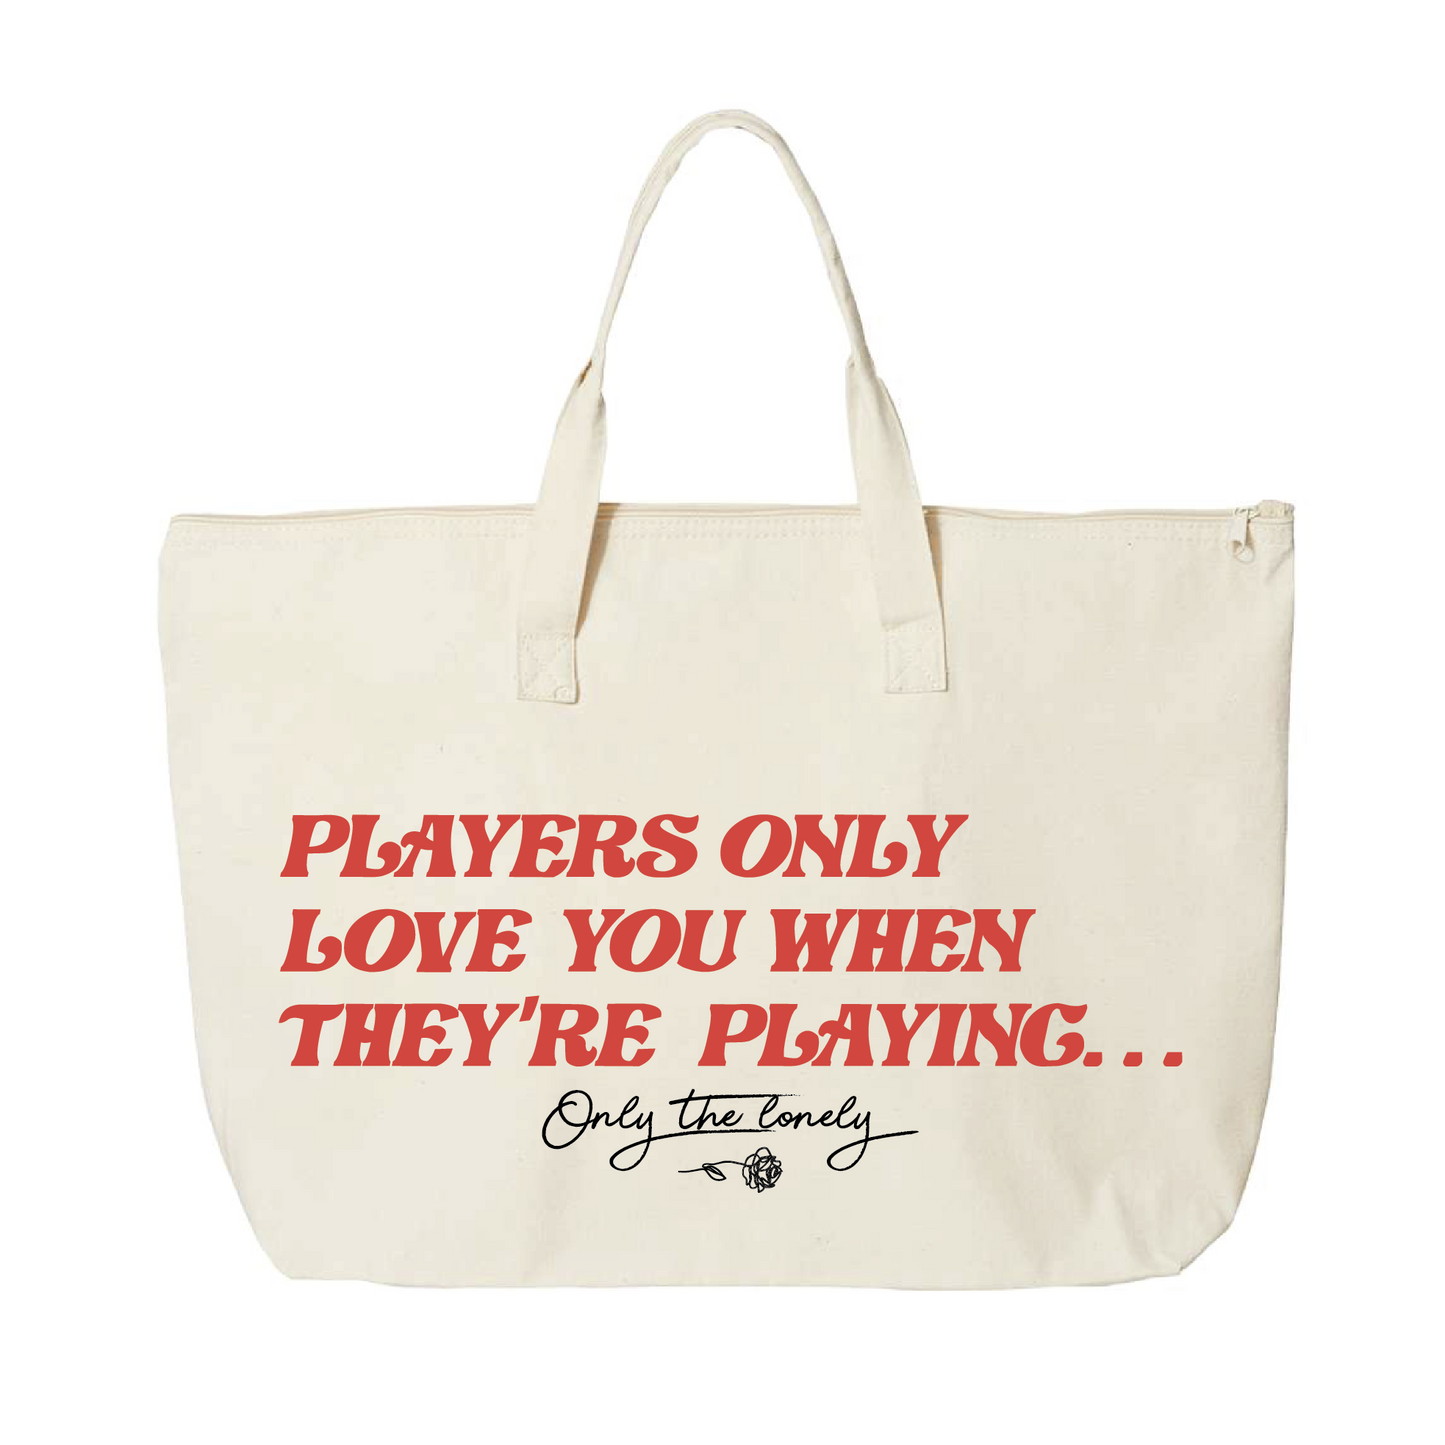 ONLY THE LONELY "PLAYERS ONLY LOVE YOU WHEN THEY'RE PLAYING" TOTE BAG